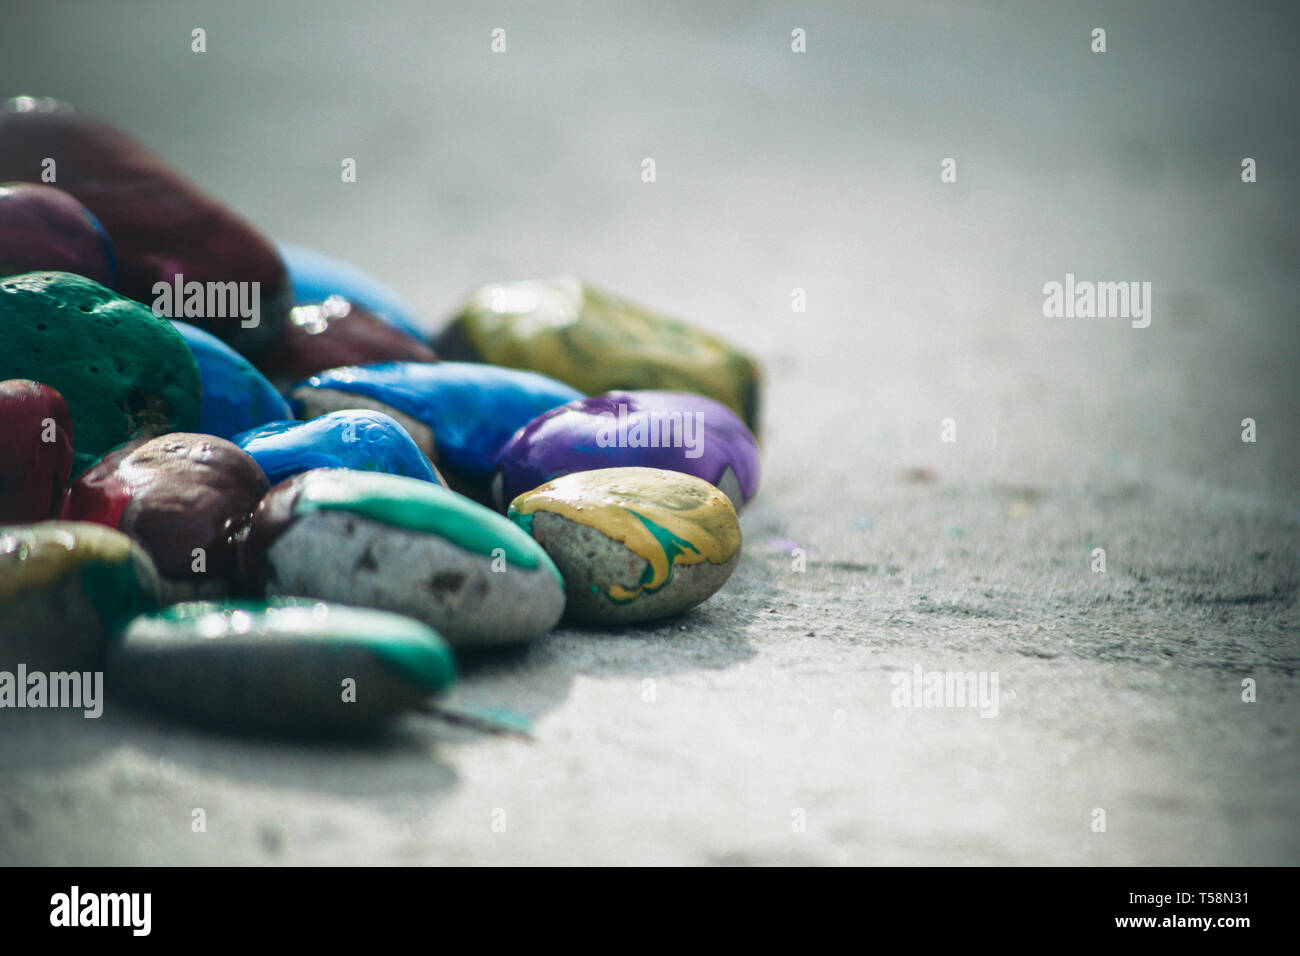 Many small pebbles covered with multicolored paint lie on the surface close-up Stock Photo